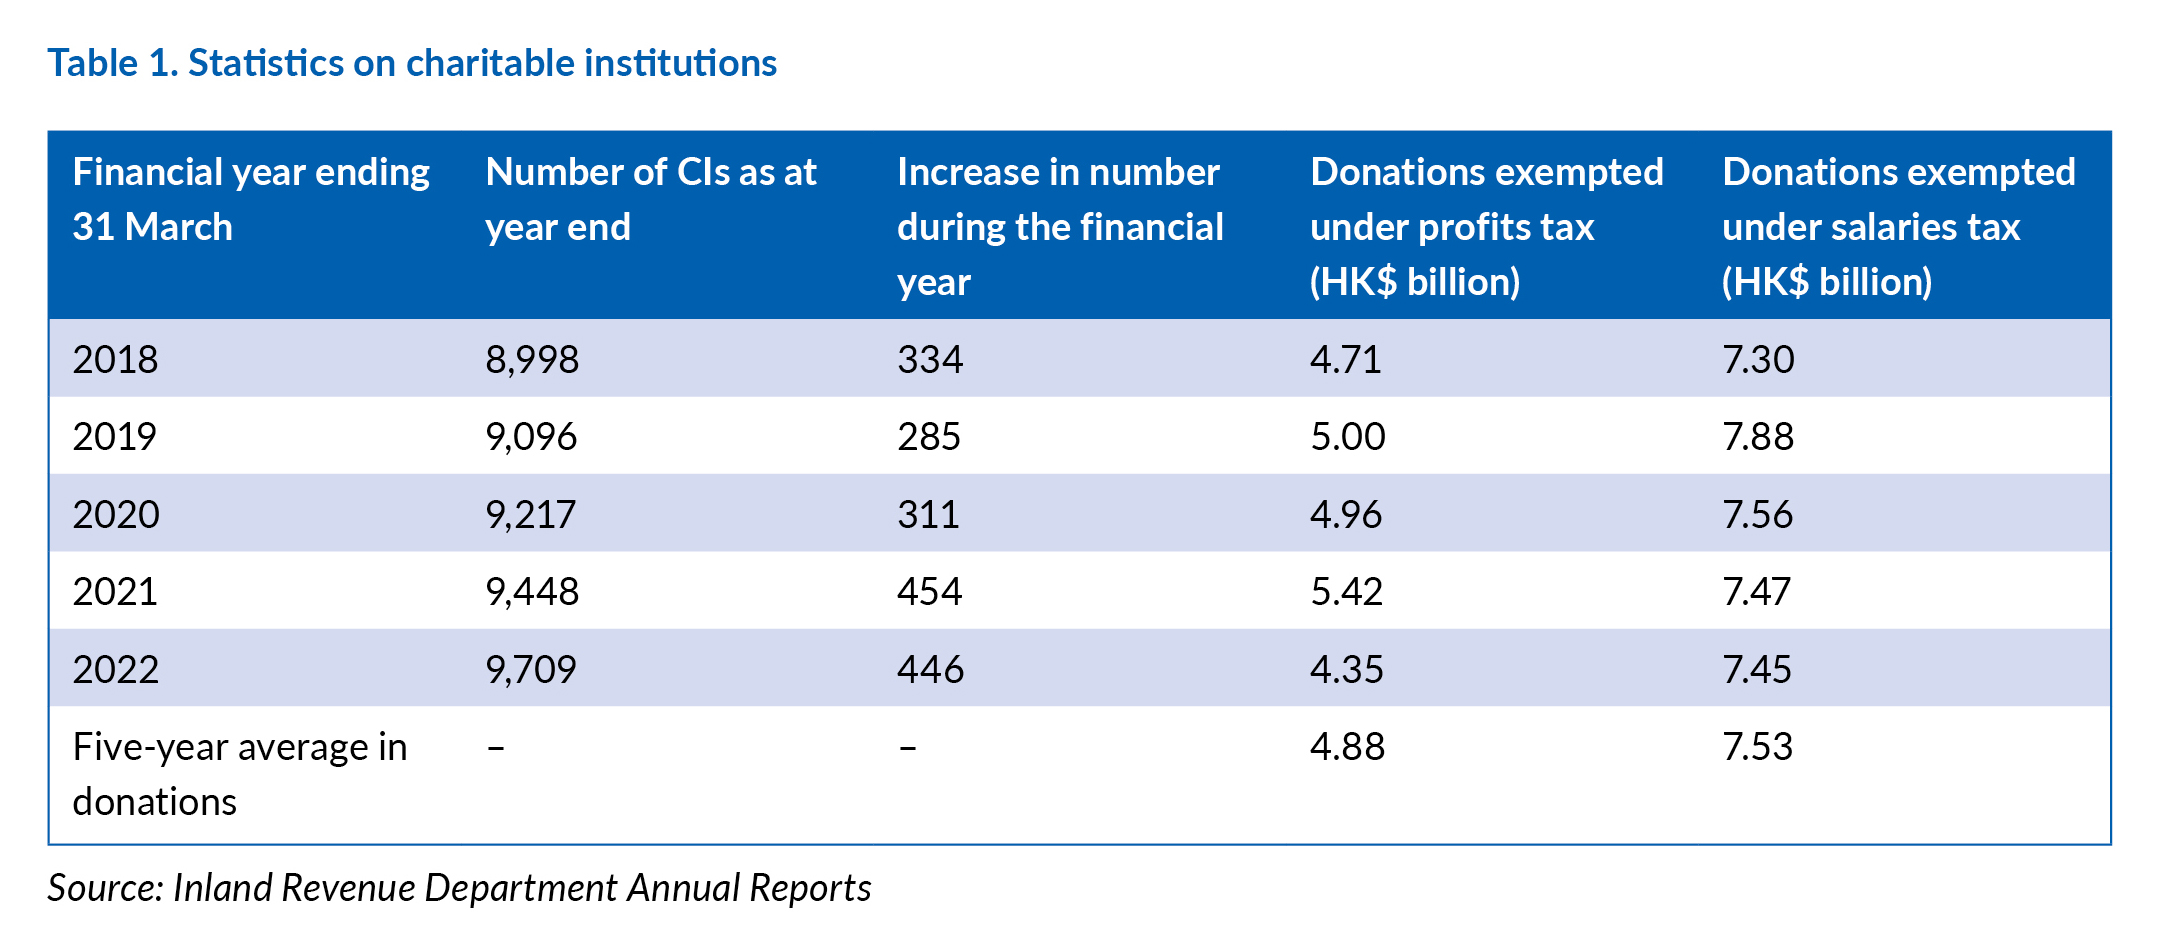 Table 1. Statistics on charitable institutions